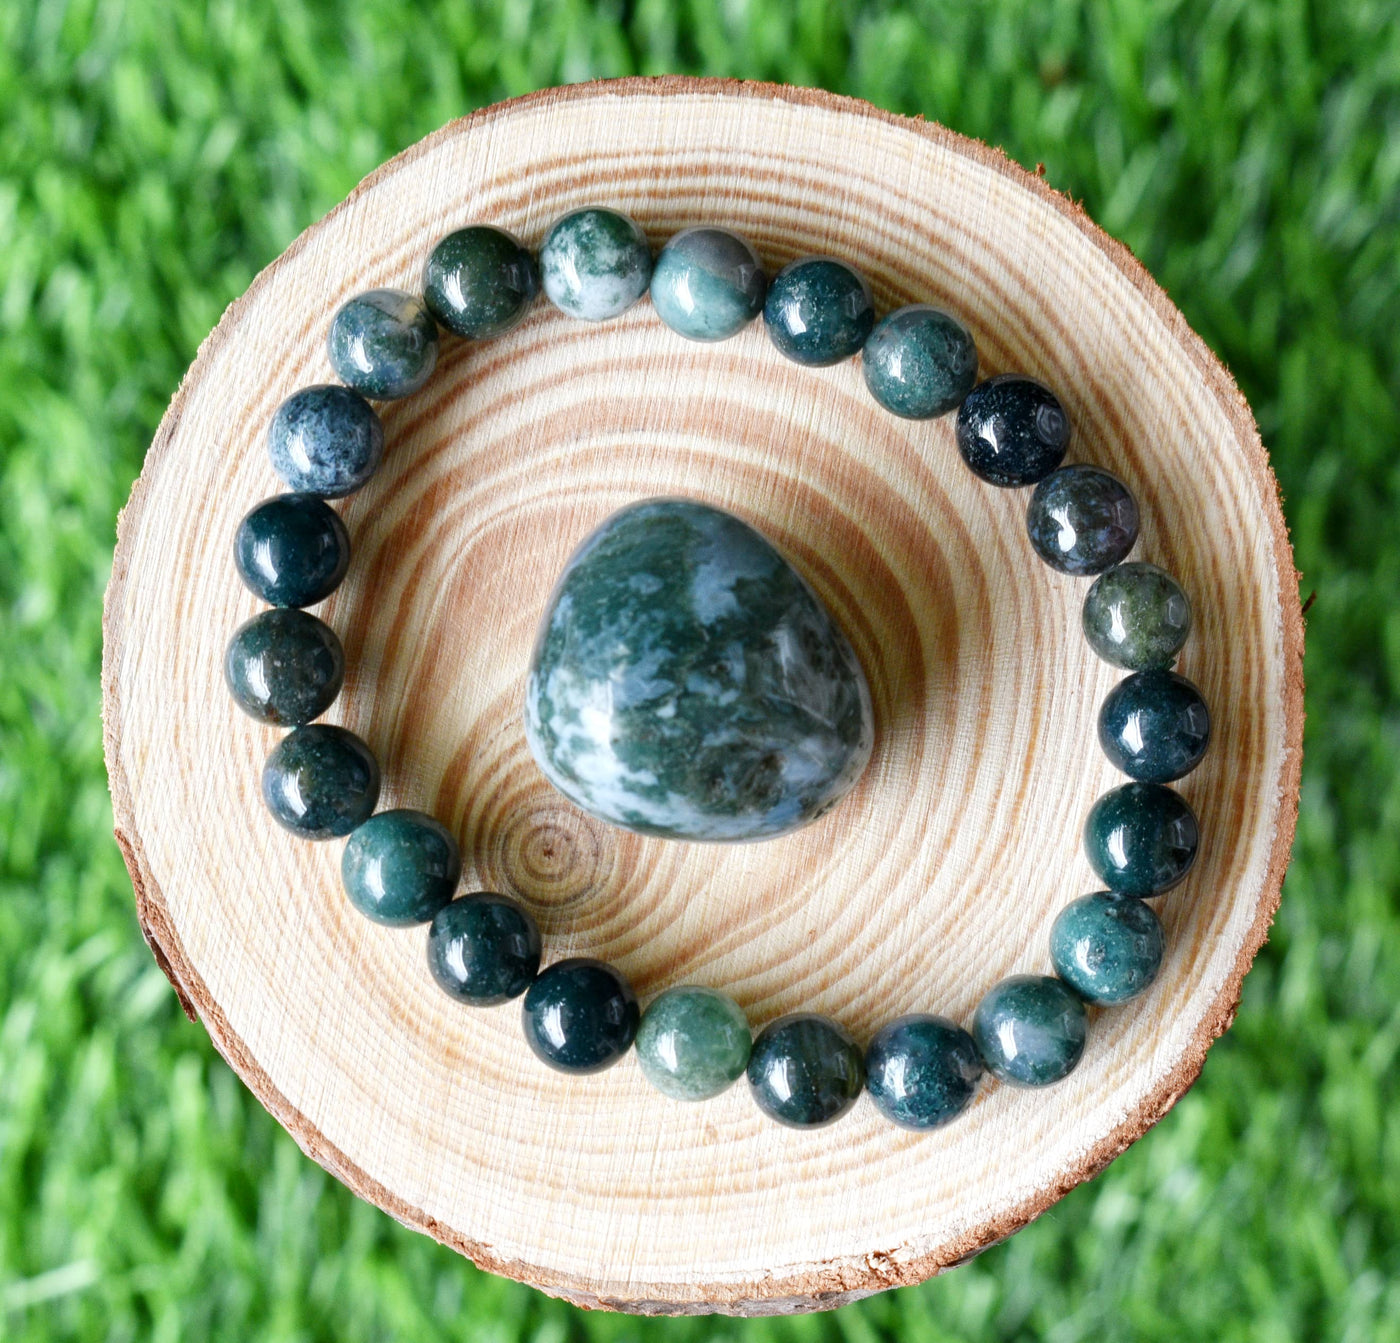 Moss Agate Crystal Gift Set For Emotional Support and Protection, Real Polished Gemstones.